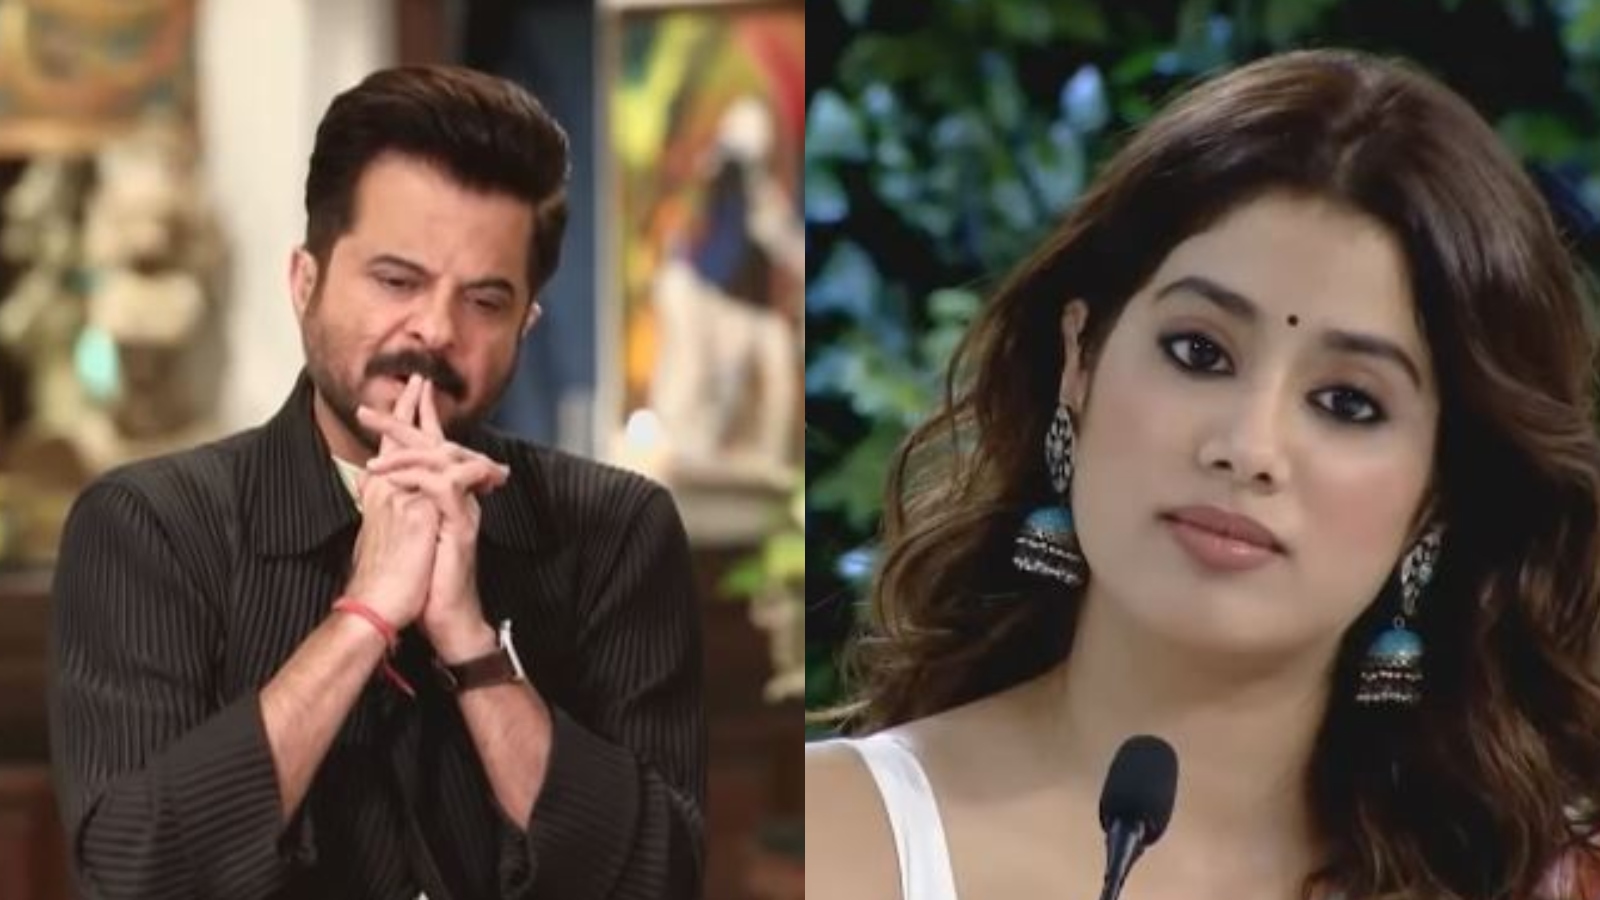 Janhvi Kapoor cried watching chachu Anil Kapoor getting beaten up Mr. India and Nayak scenes, reveals her mom Sridevi asked her learn from him